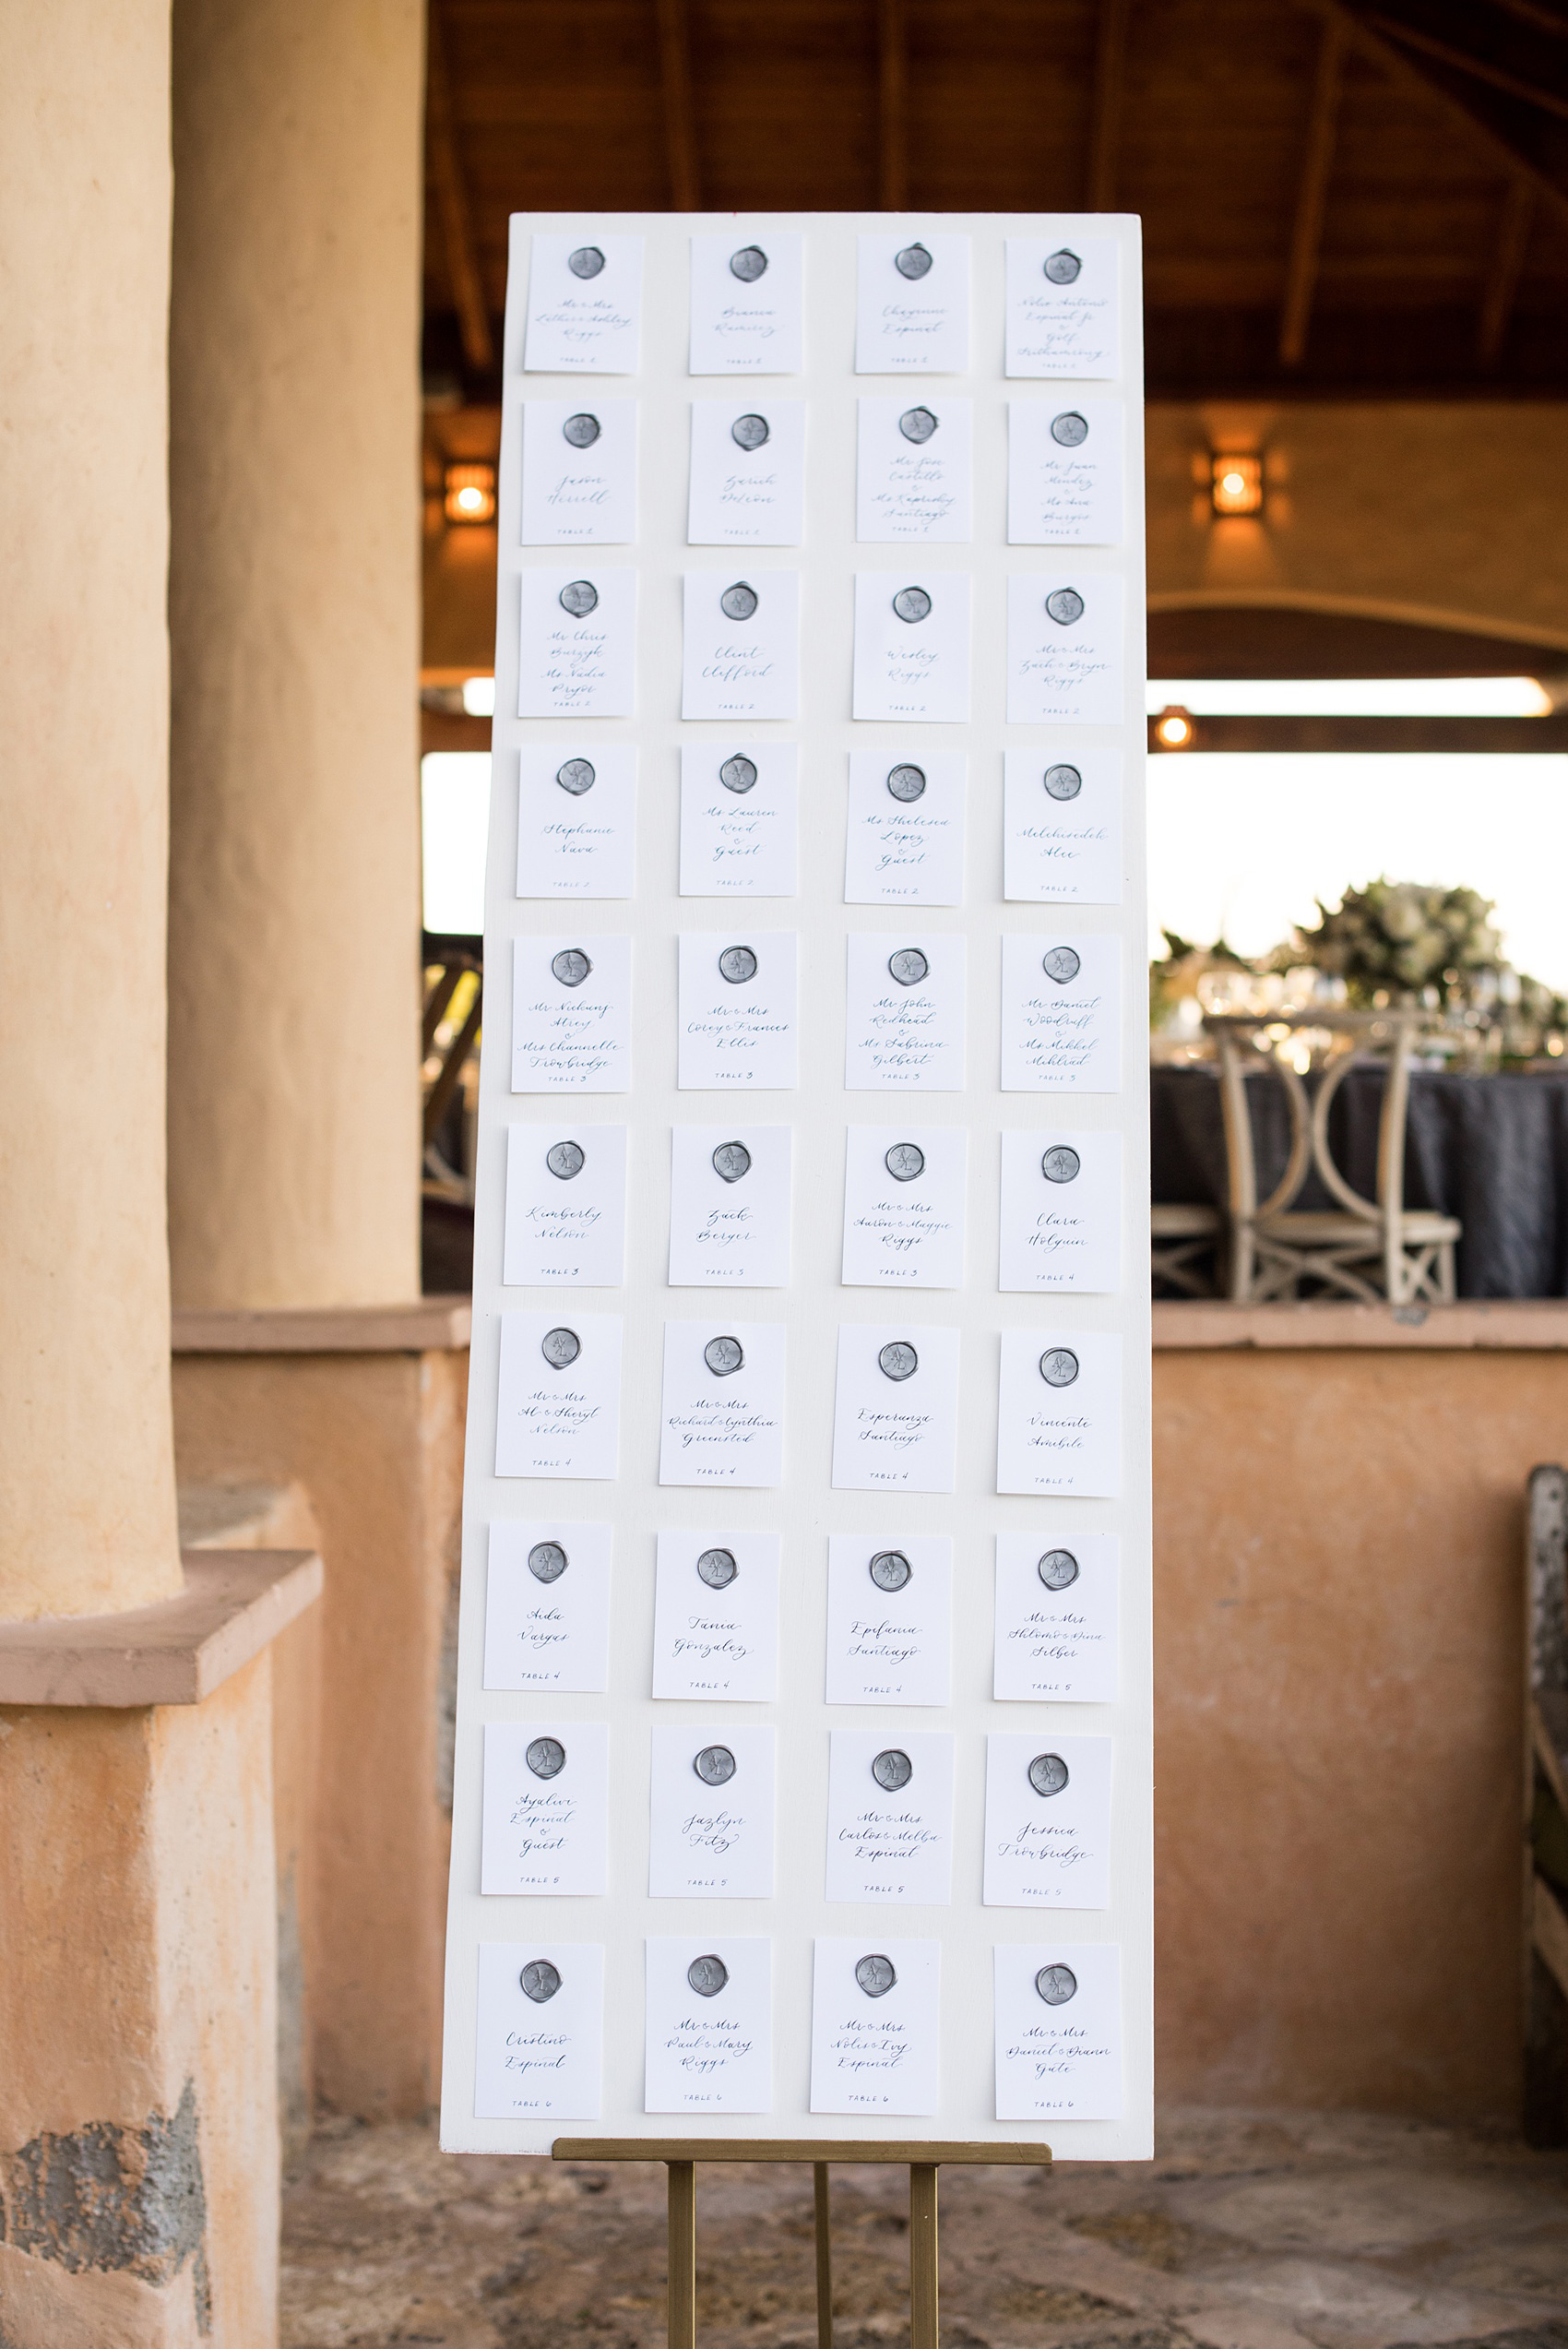 Casa de Campo in the Dominican Republic is a great location for a destination wedding. It’s in La Romana, an hour from Punta Cana, and is an all inclusive resort with Minitas beach and mountains view. It’s a beautiful venue, evidenced by these pictures by Mikkel Paige Photography. Click through for detail ideas like this custom calligraphy escort card display with wax seals! Planning by @theeventeur, cards by @agianetti of Write Pretty for Me. #mikkelpaige #escortcards #customcalligraphy 